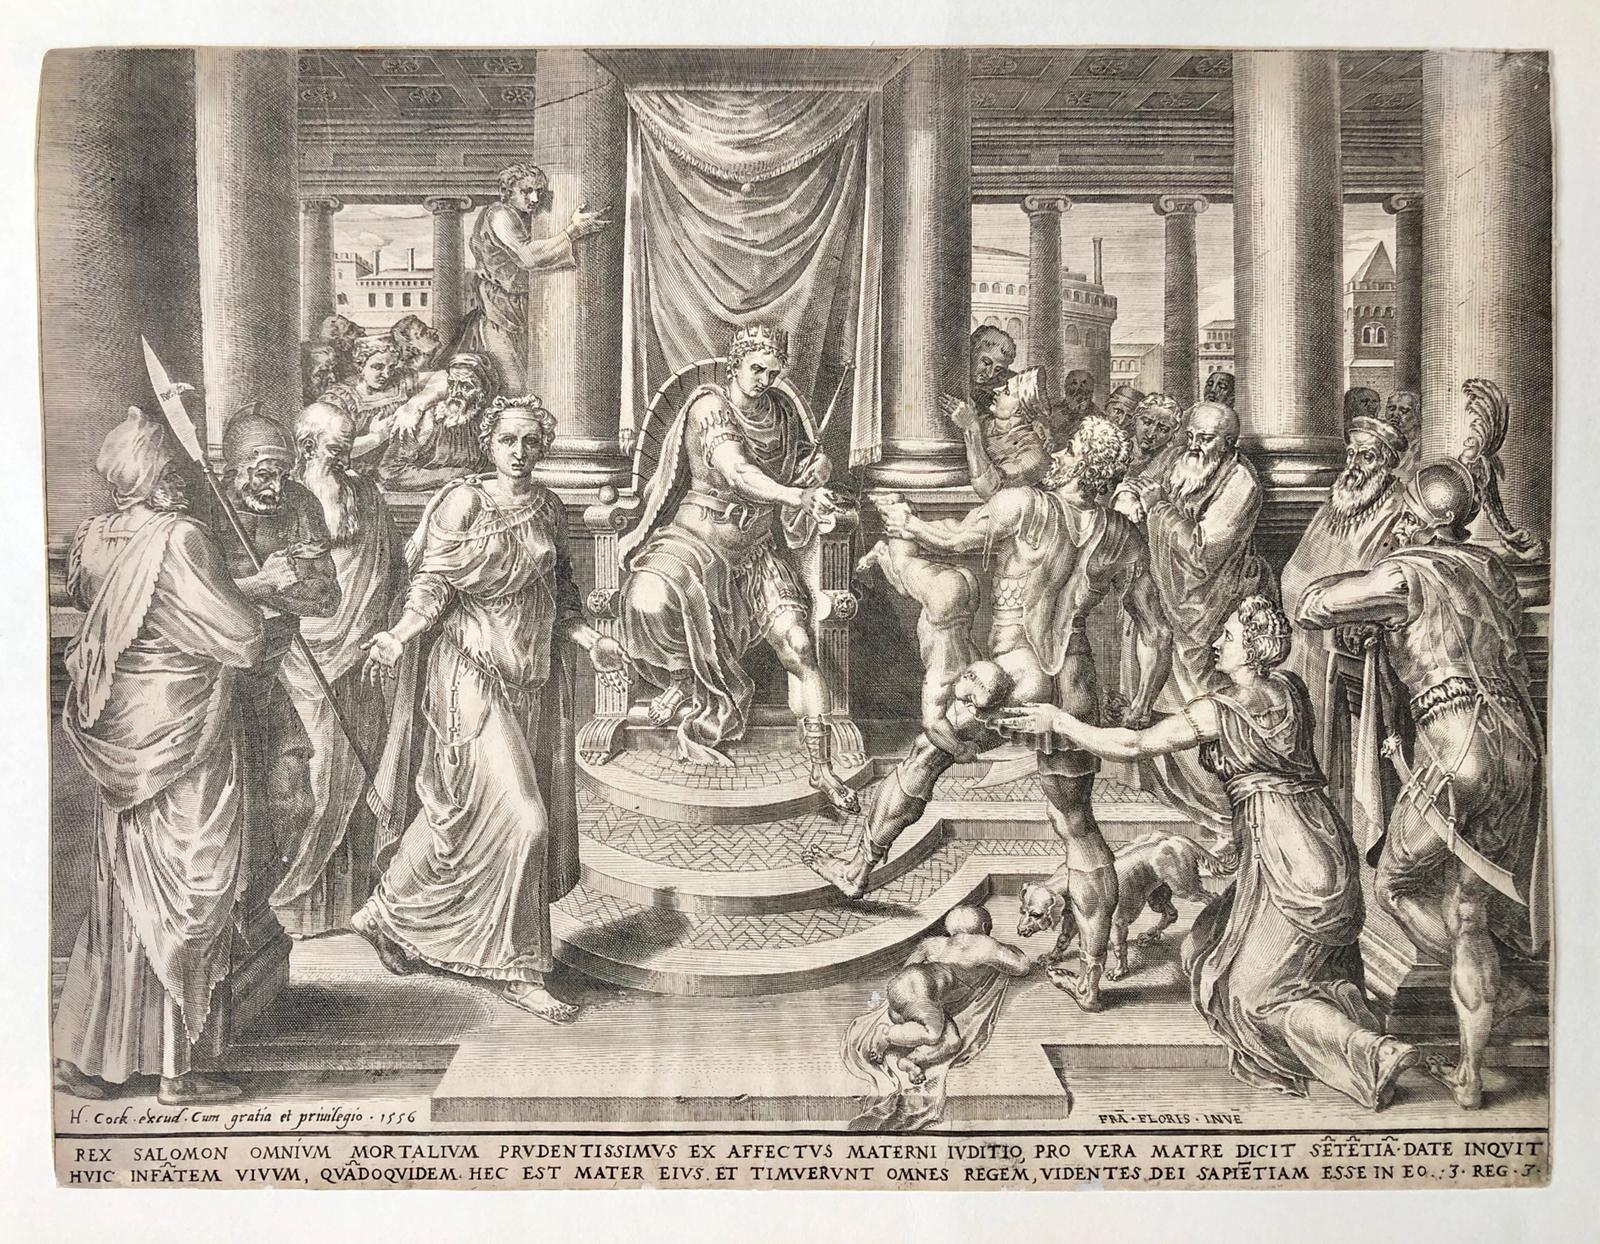 [Antique print, etching and engraving] The Judgment of Solomon, published 1556.